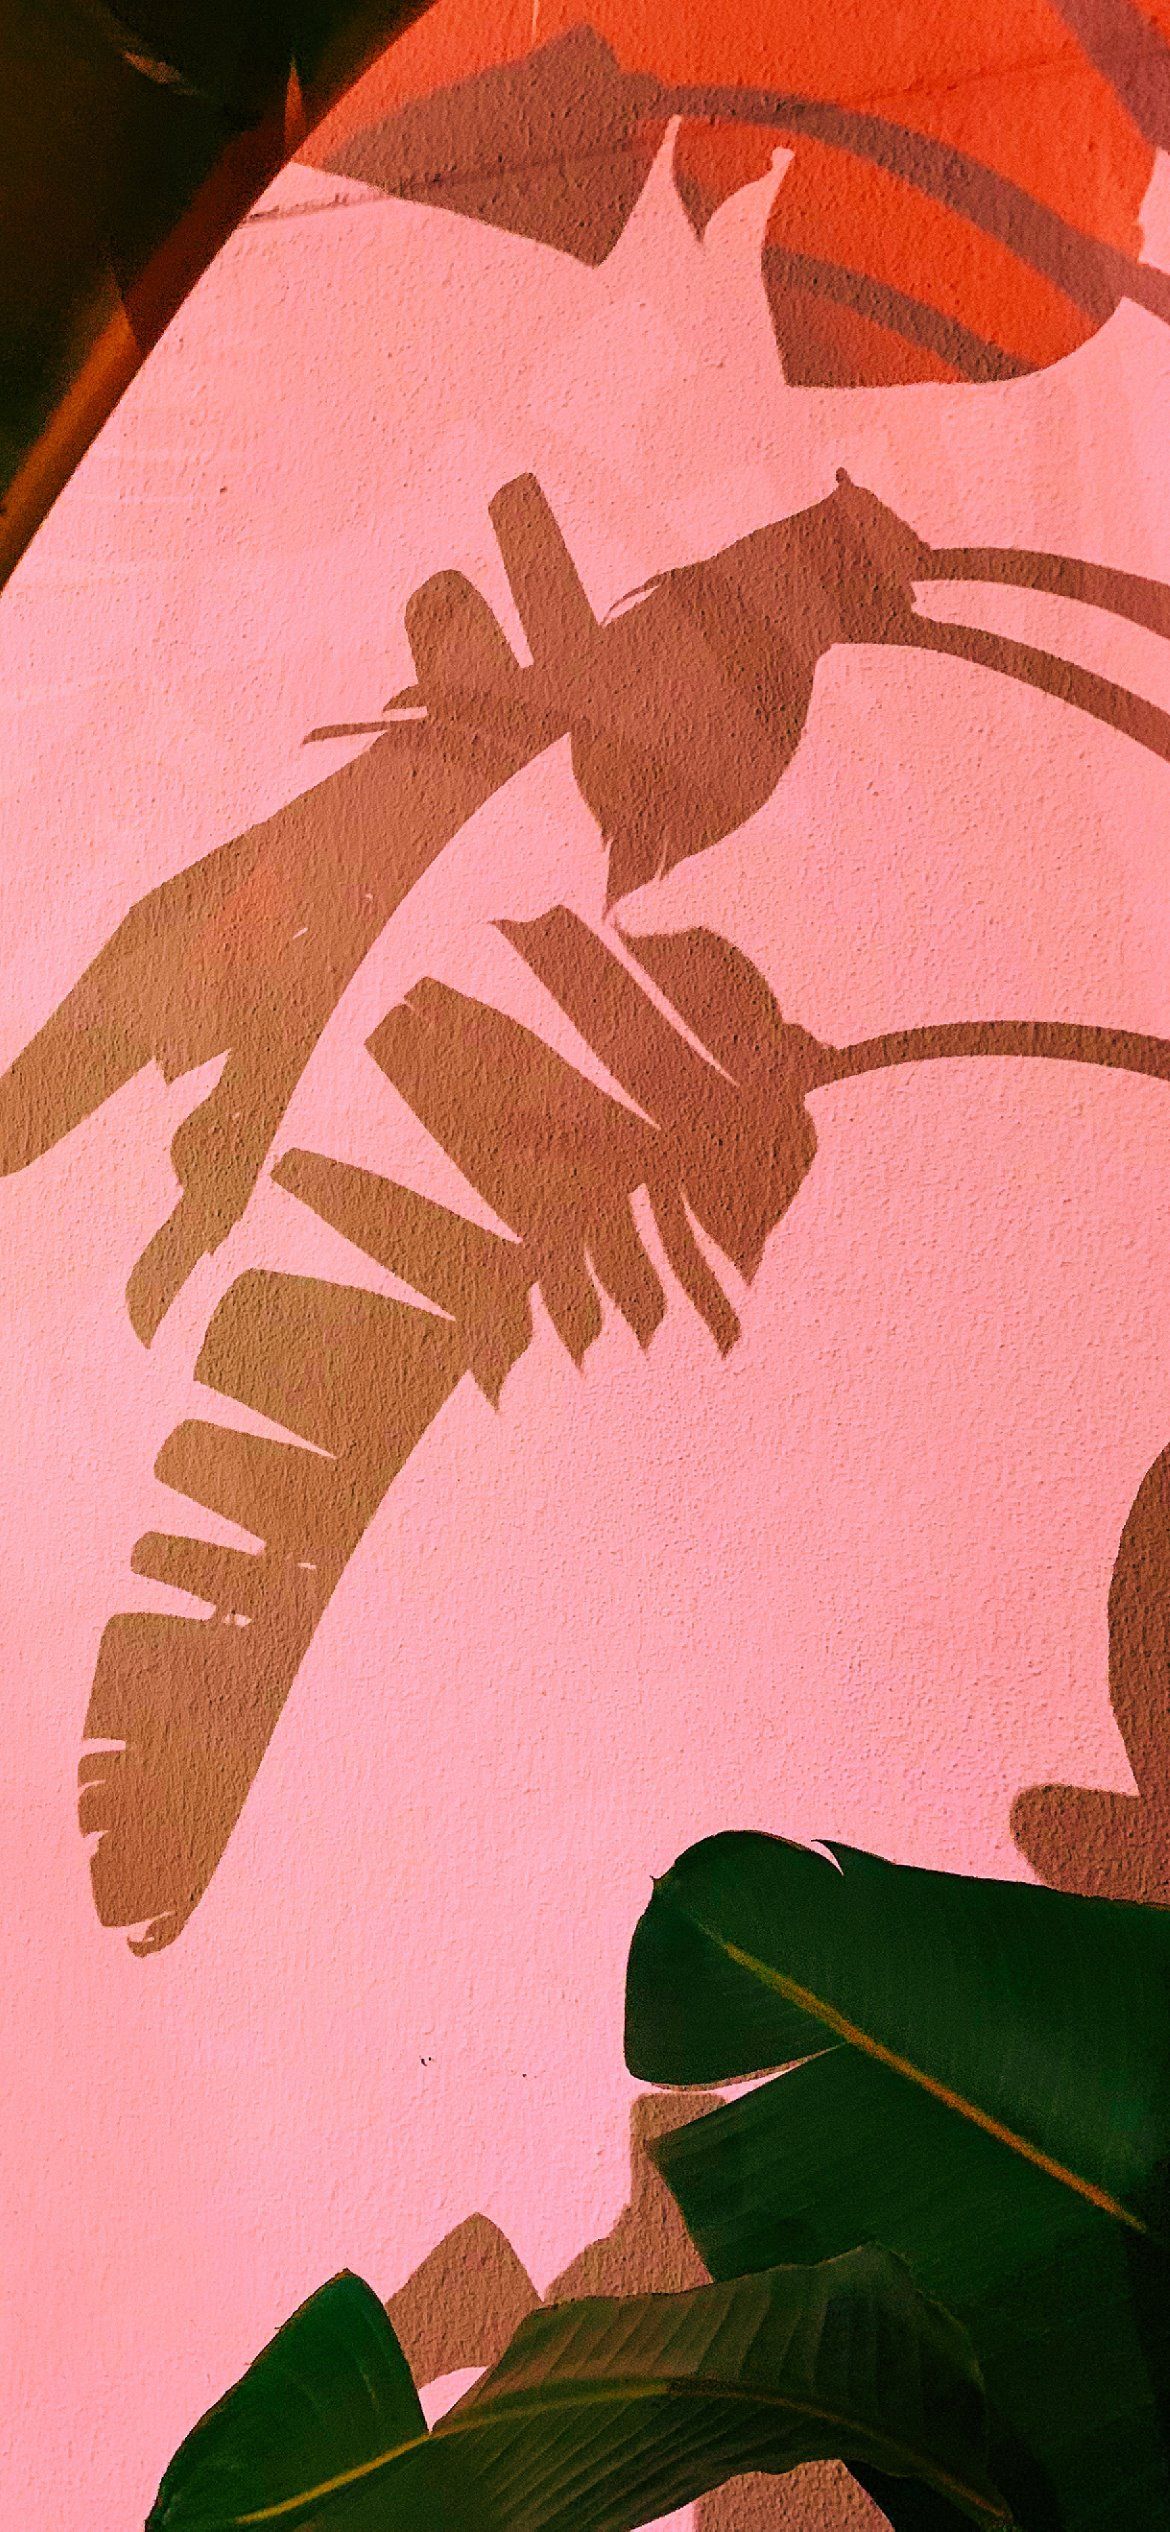 A pink wall with a painting of a leaf on it - IPhone, pink, pink phone, leaves, tropical, champagne, fall iPhone